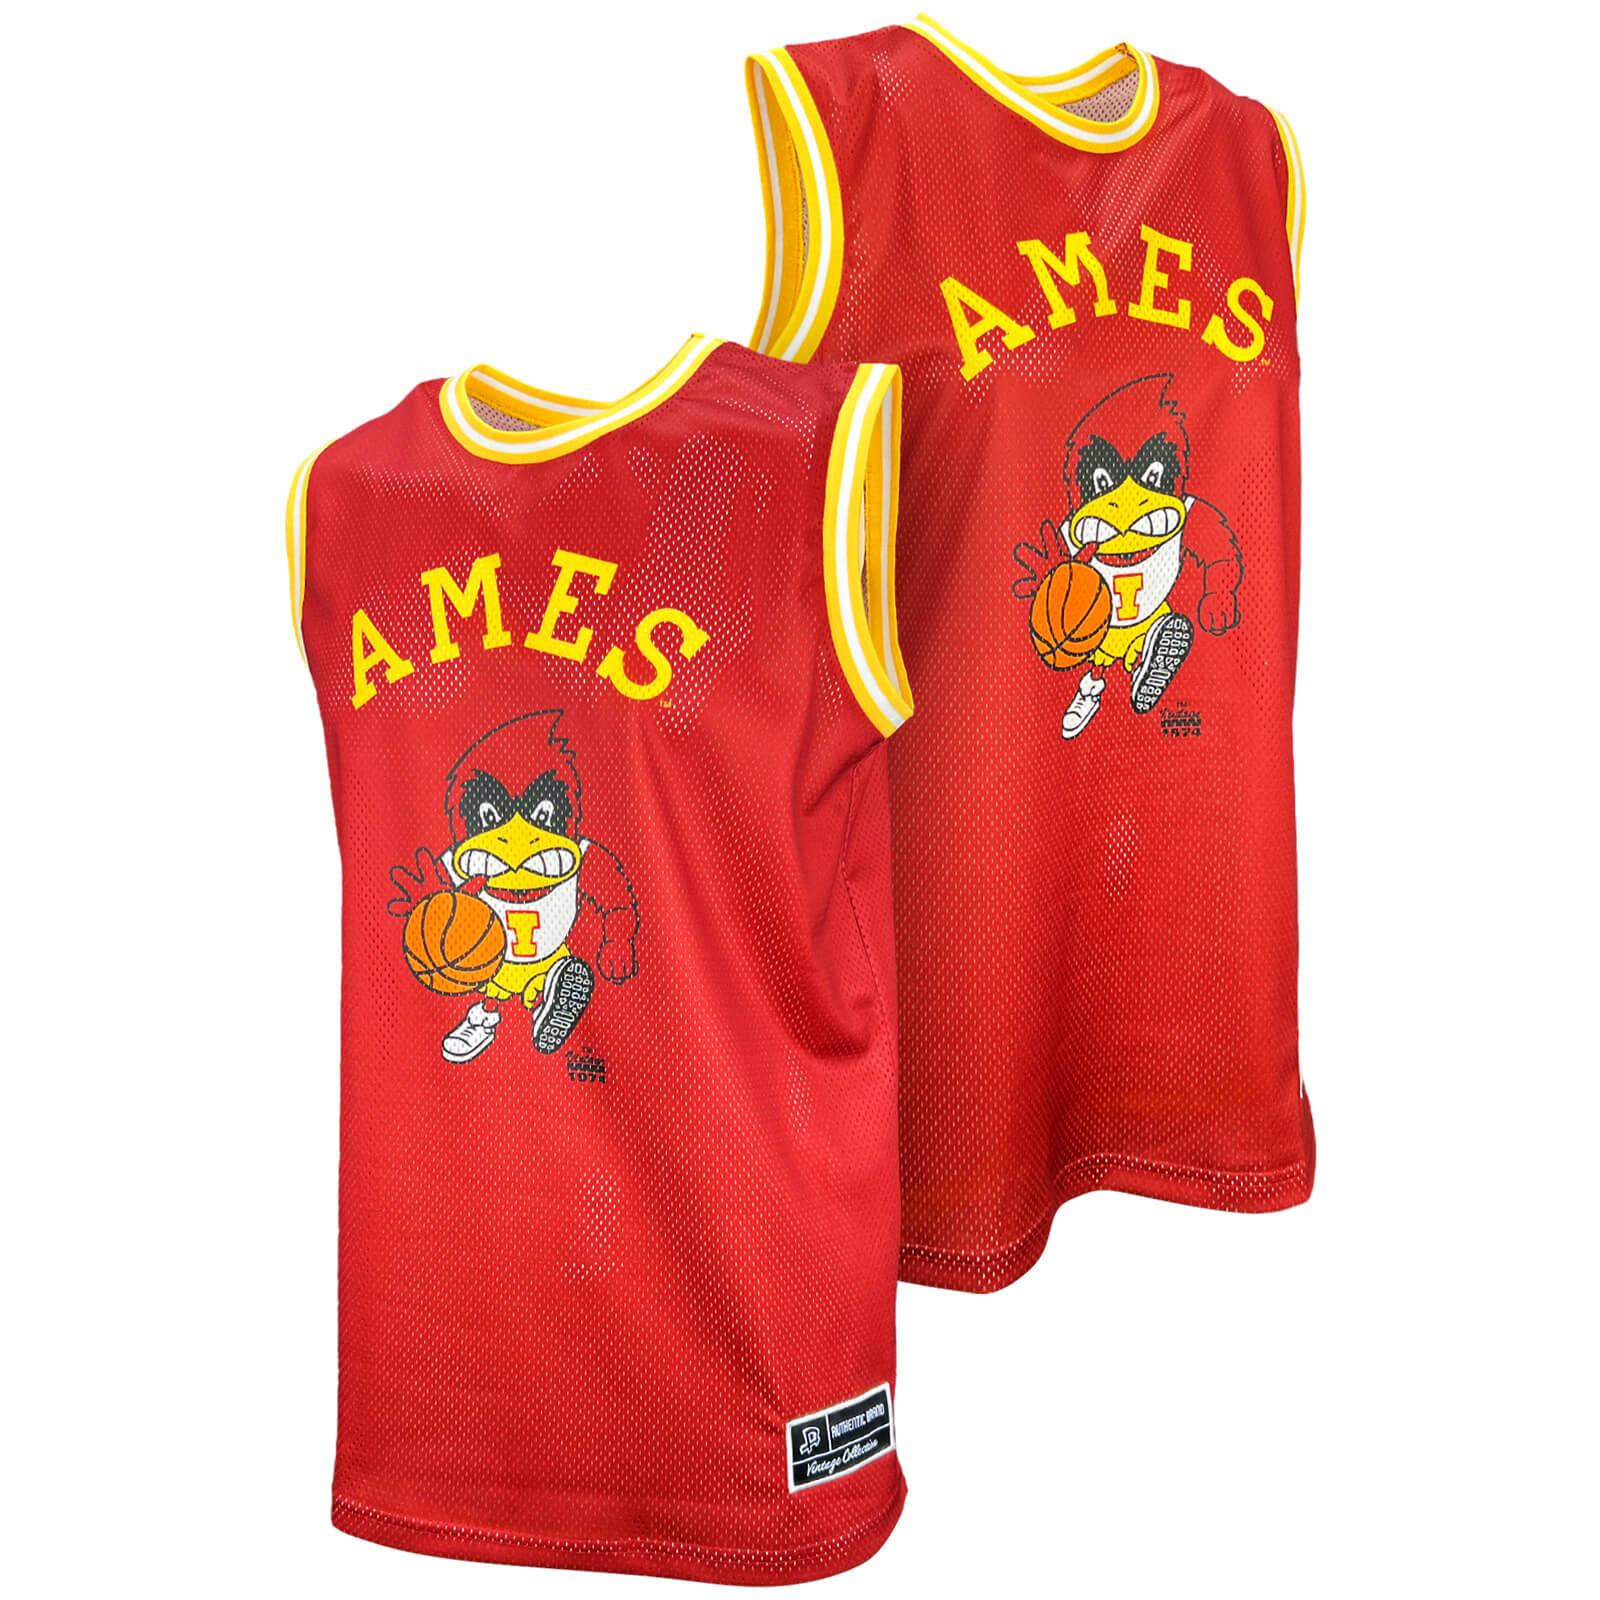 Authentic Brand Ames Basketball Cy Cardinal Jersey